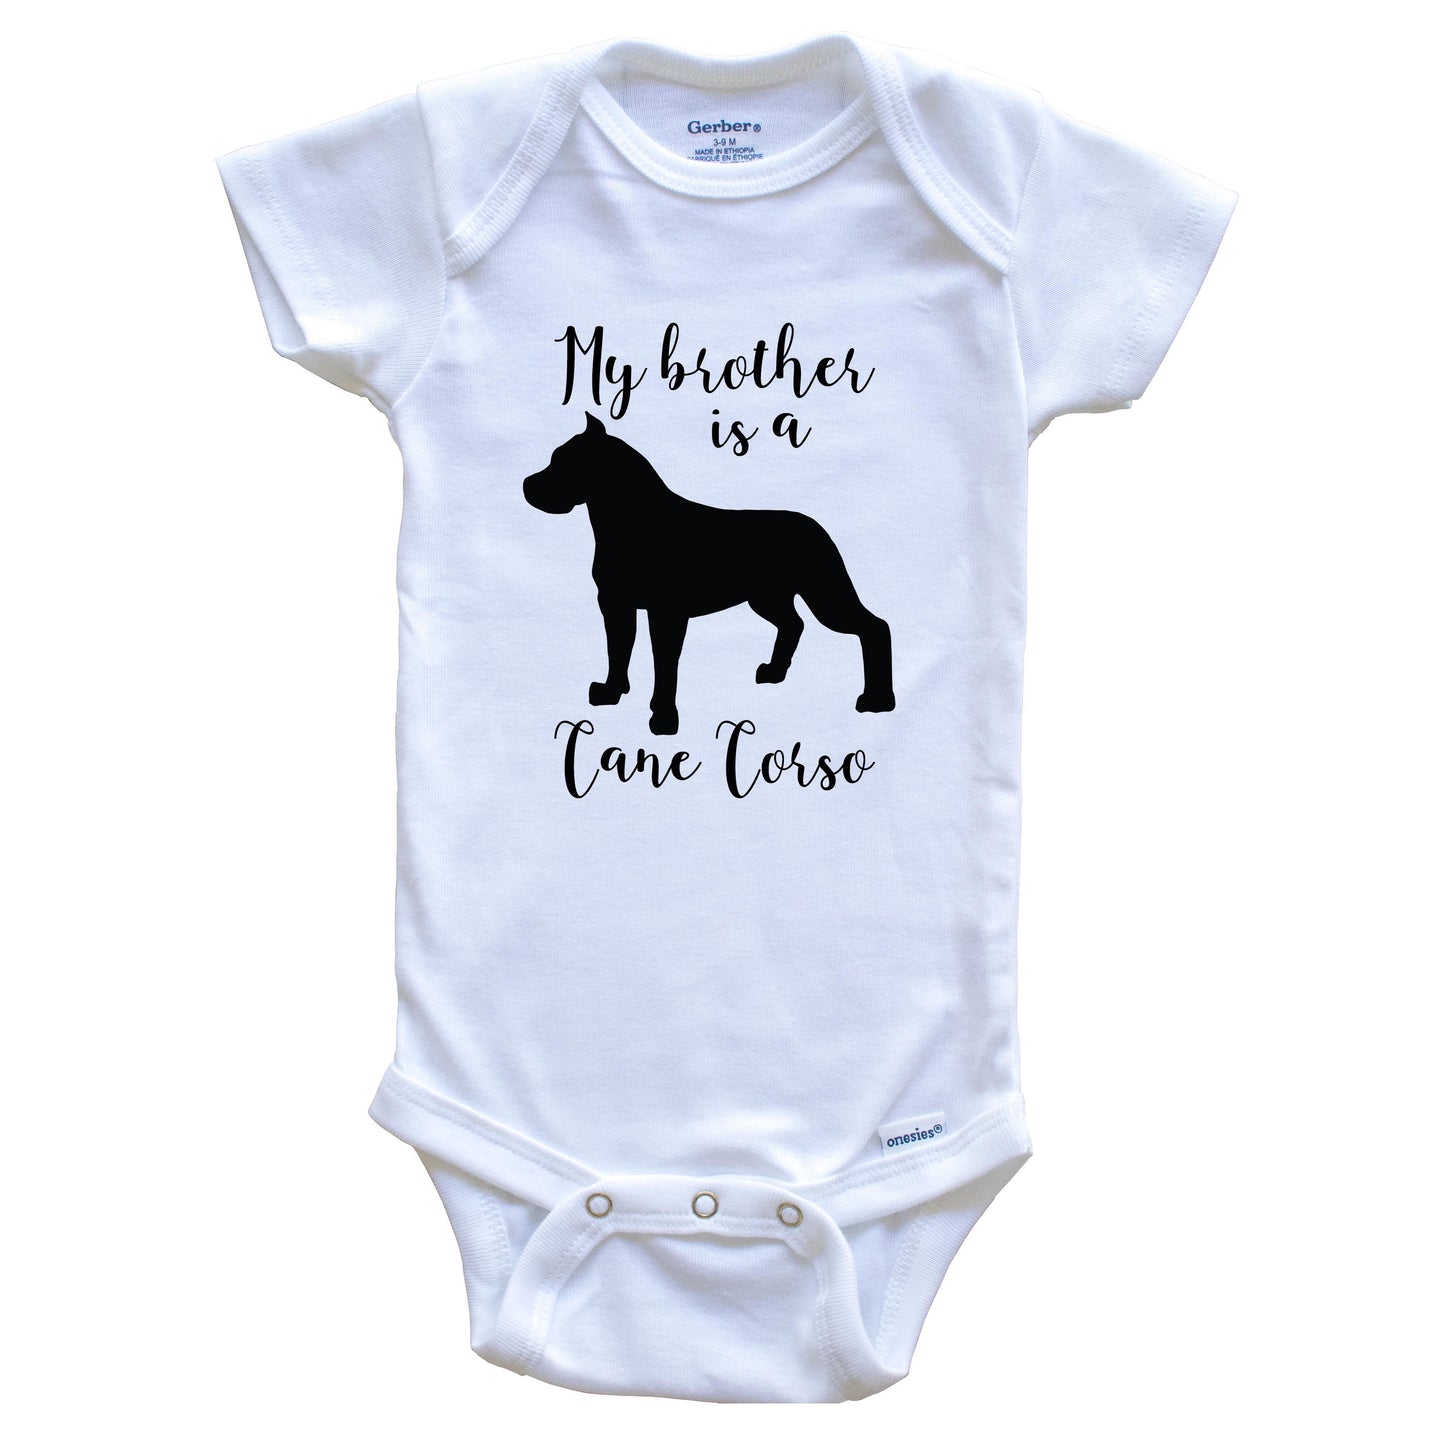 My Brother Is A Cane Corso Cute Dog Baby Onesie - Cane Corso One Piece Baby Bodysuit